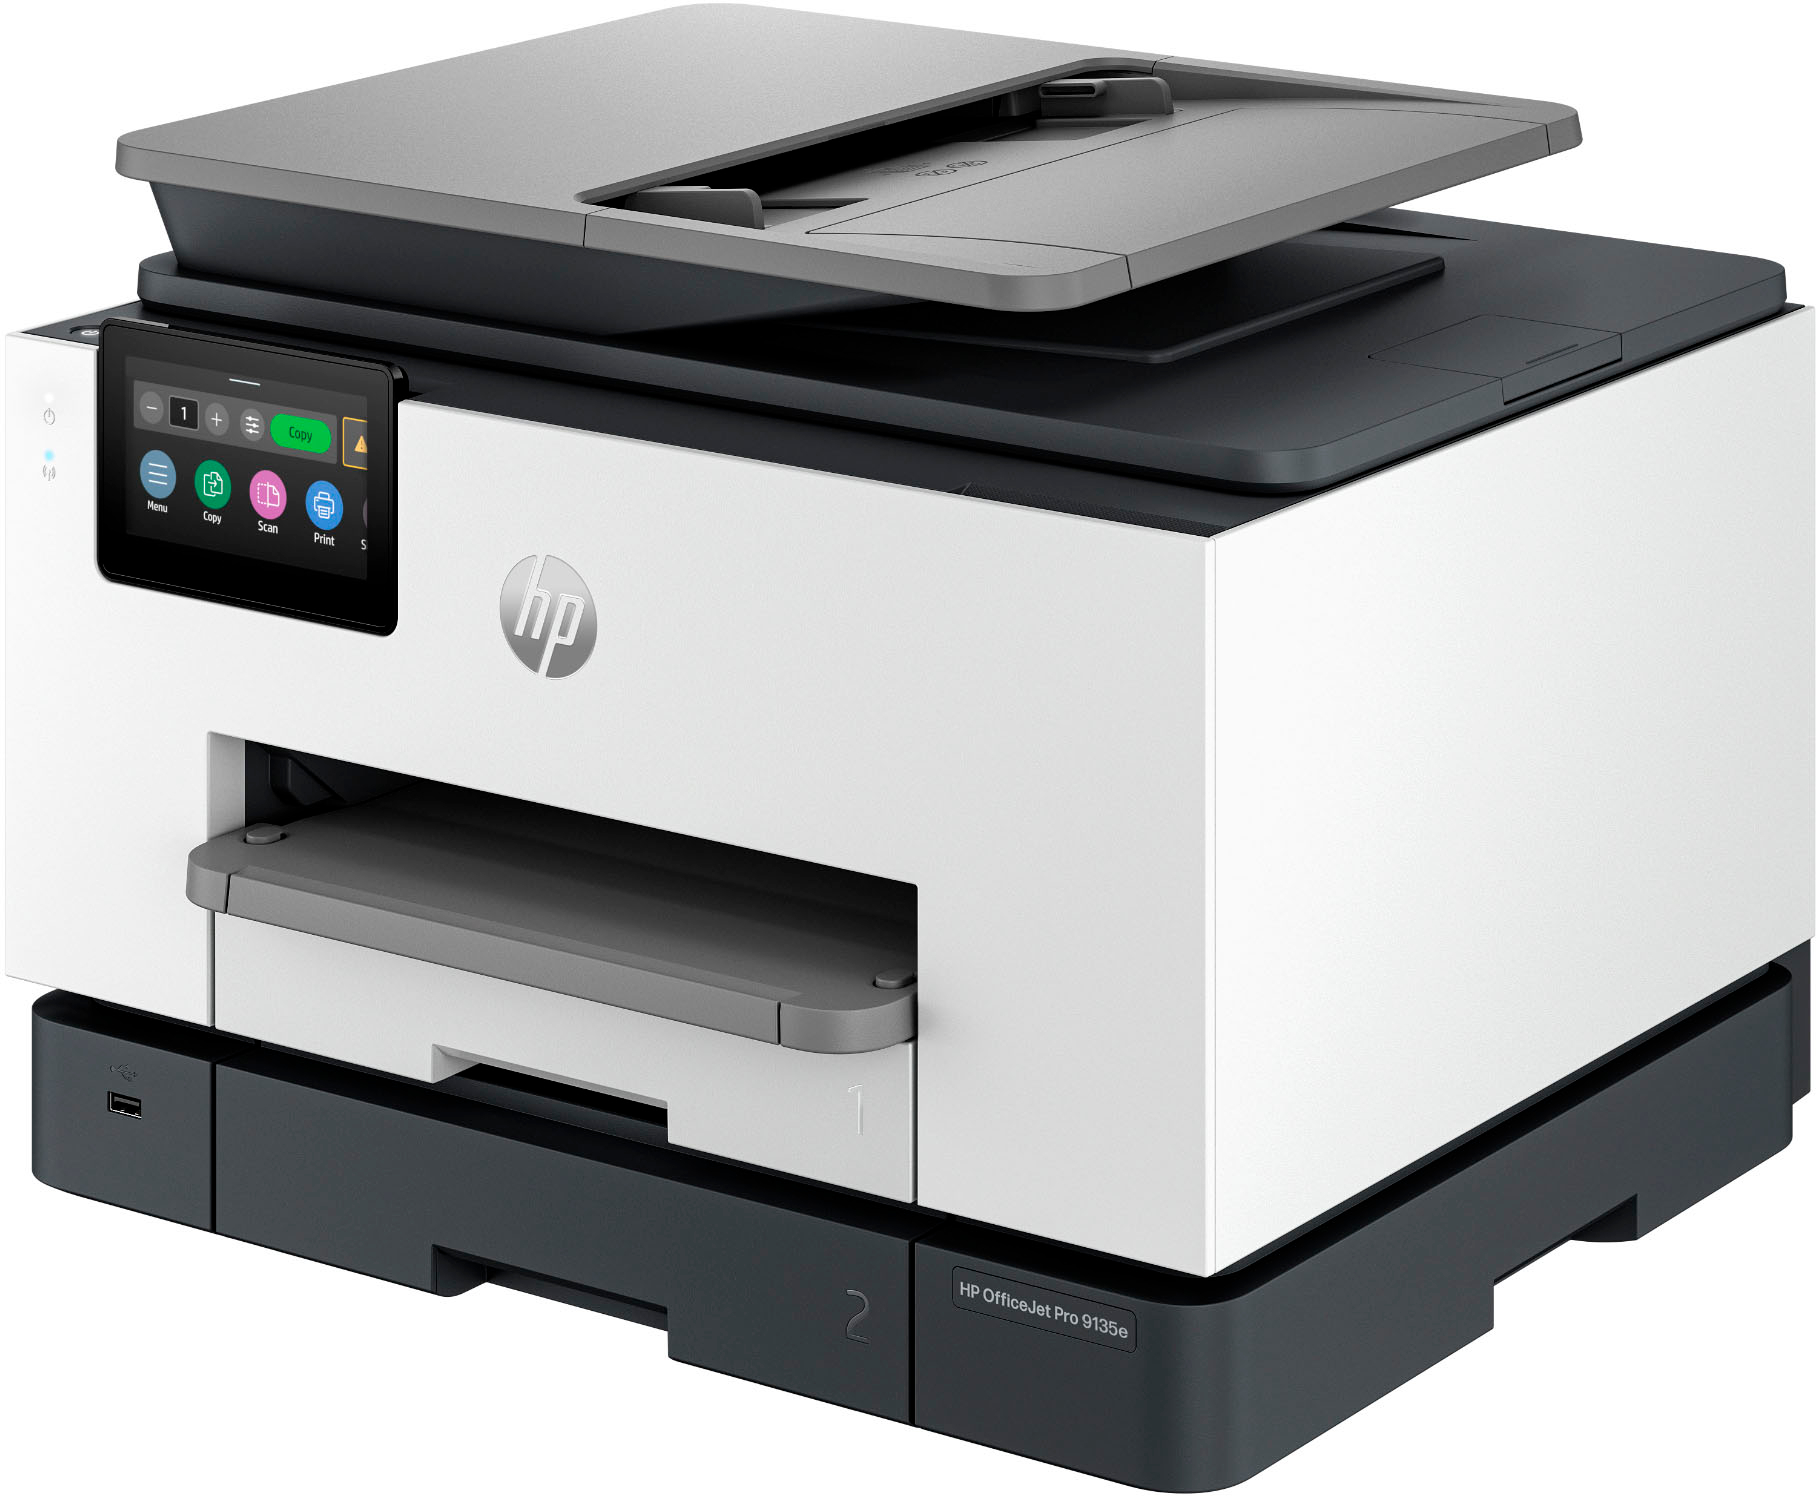 HP OfficeJet 9025e All-in-One Wireless Color Inkjet Printer - 6 months free  Instant Ink with HP+ 